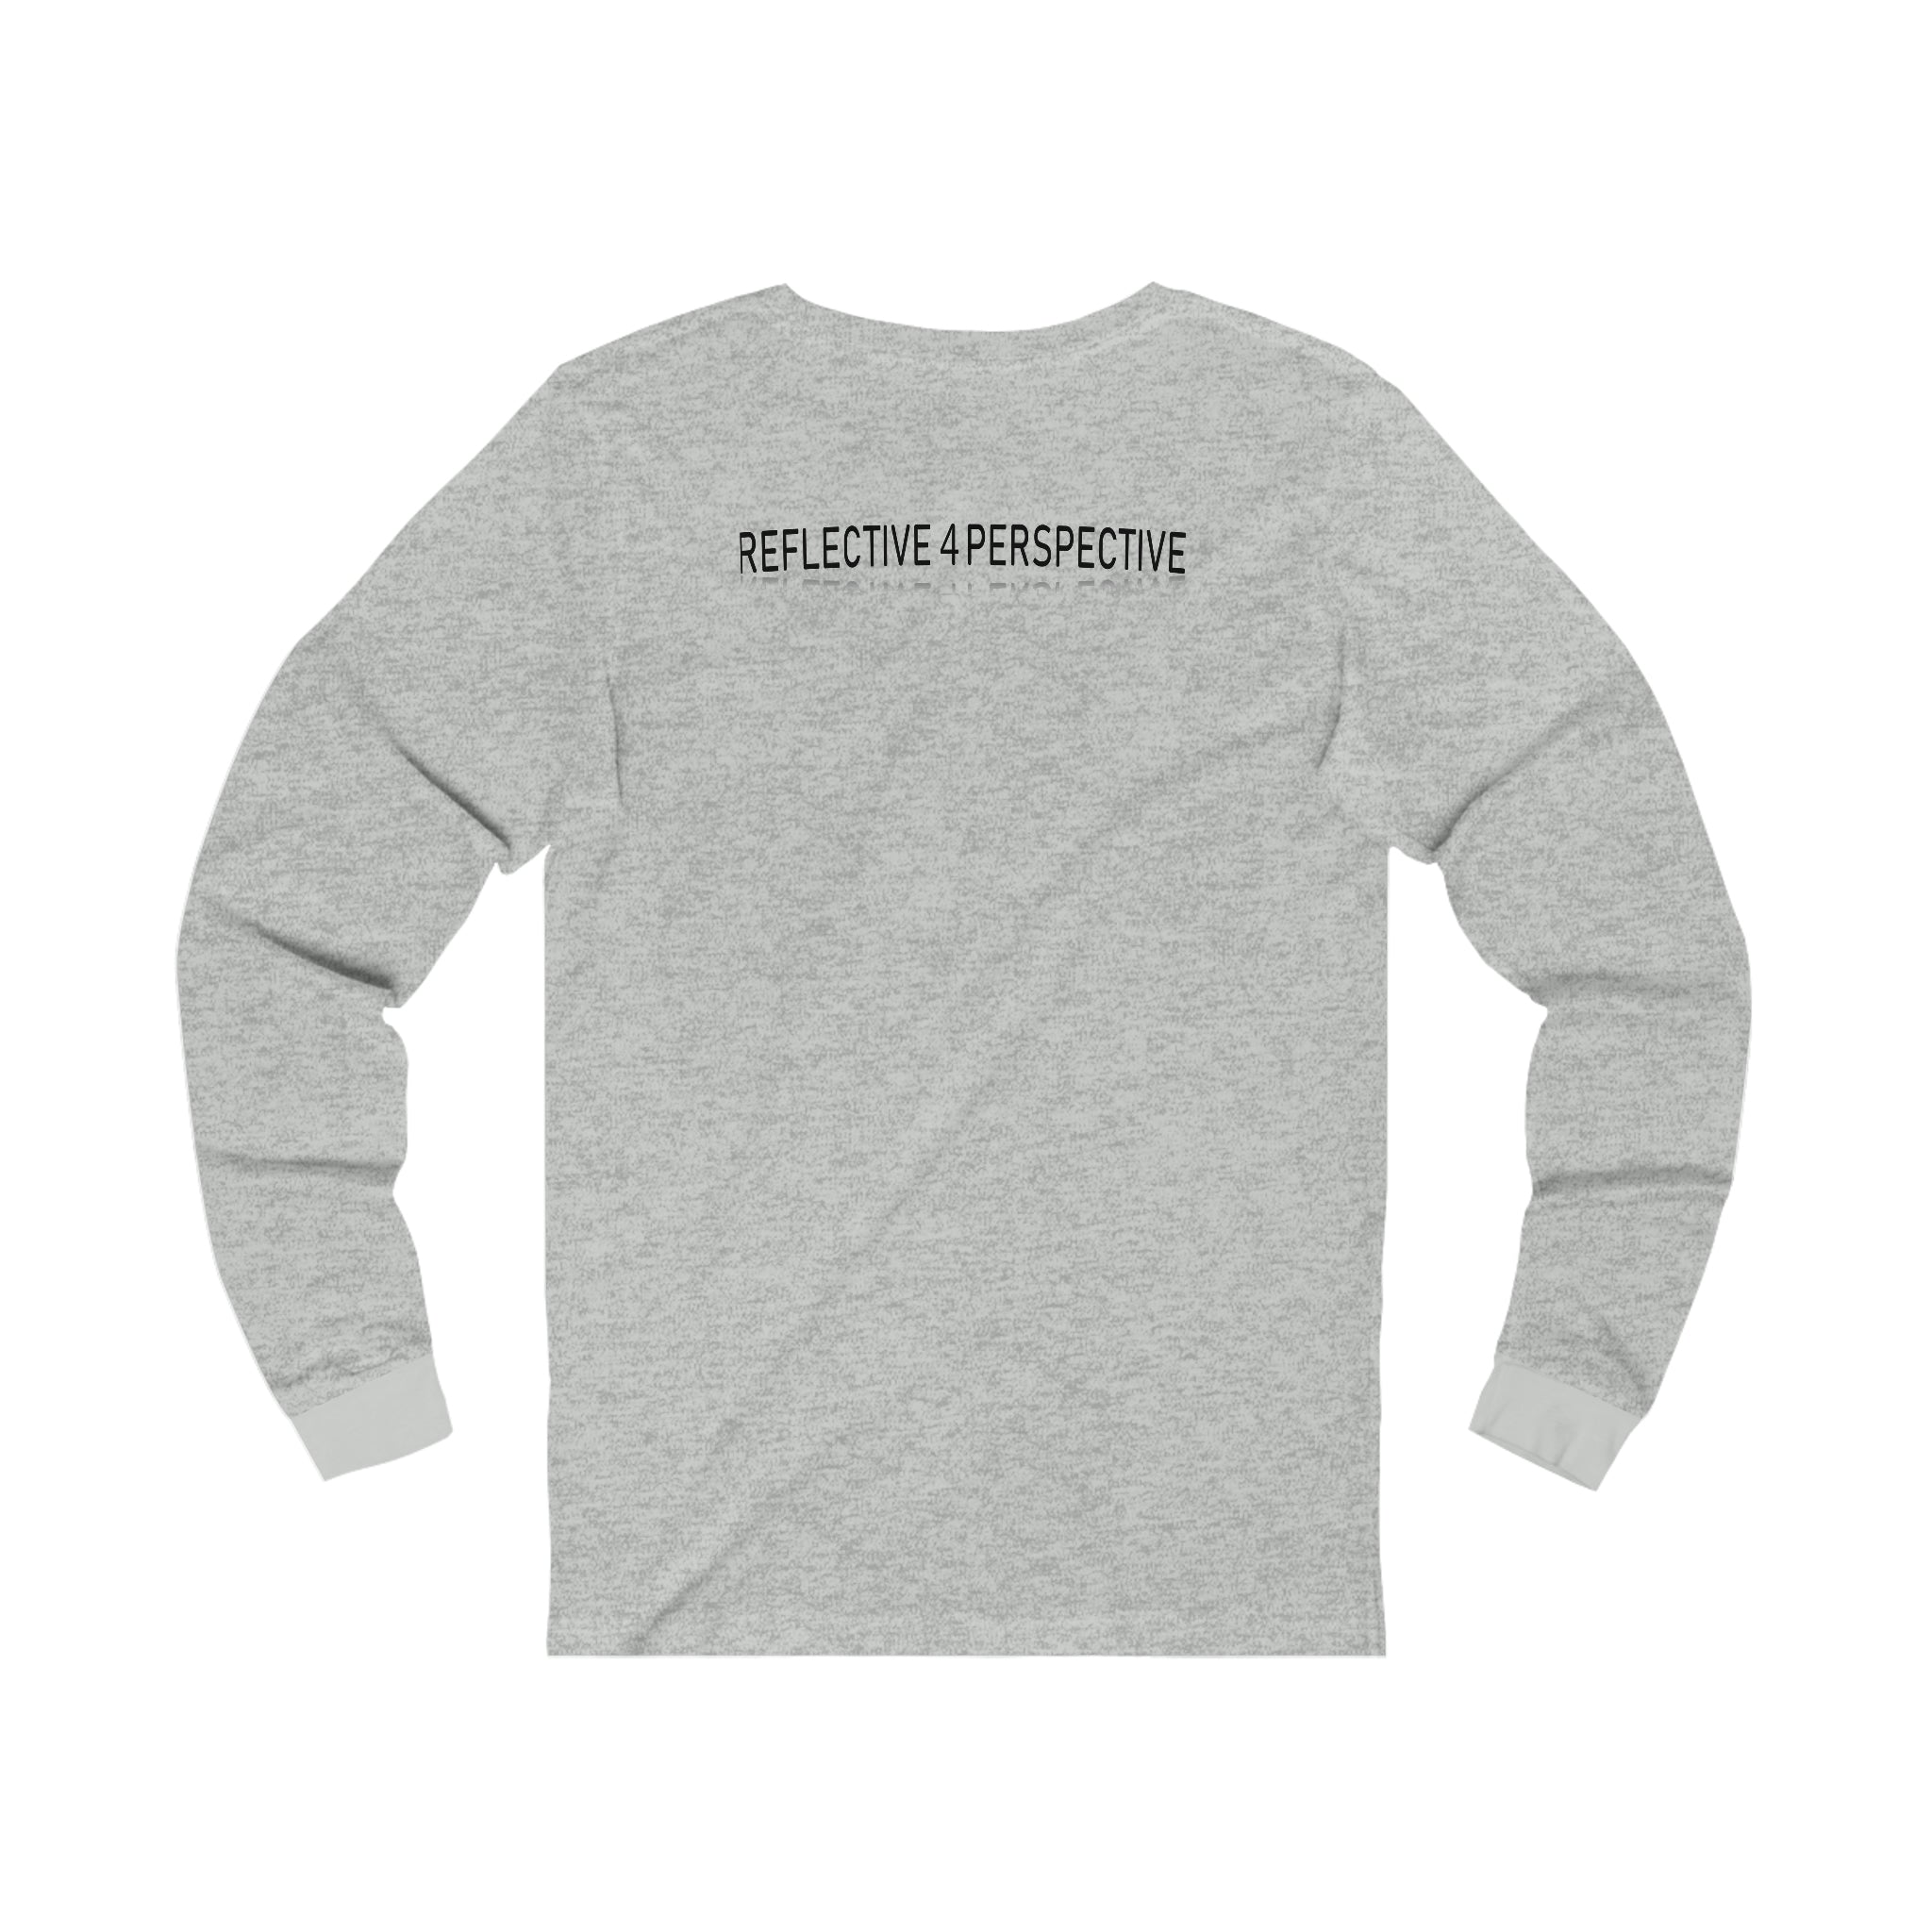 "Everything Will be Alright" Women's Long Sleeve Tee